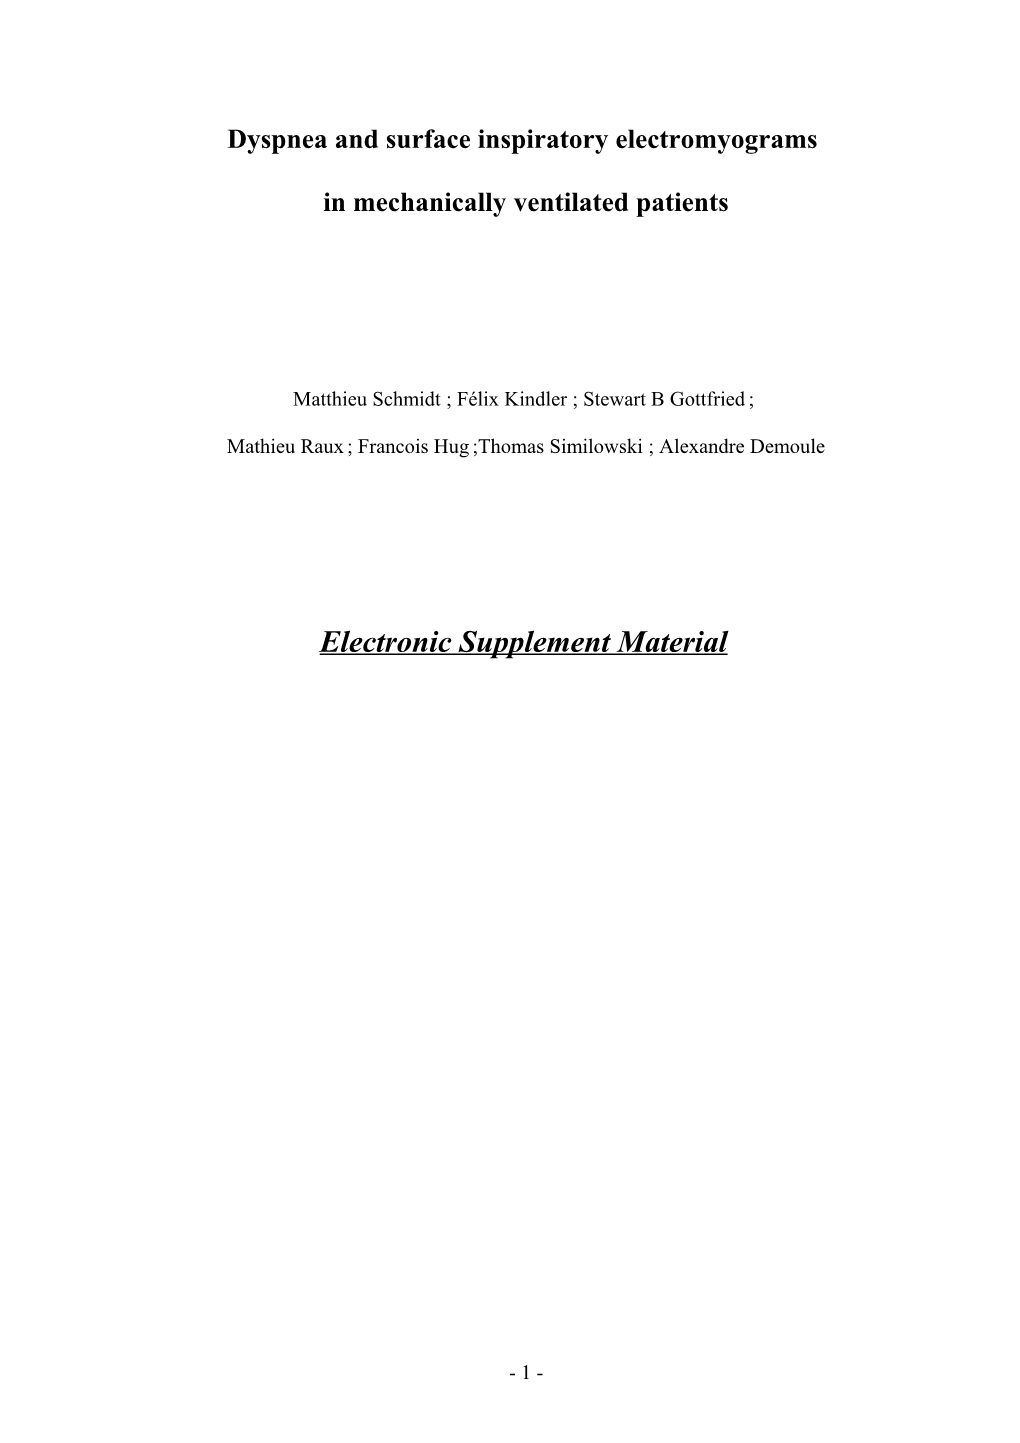 Electronic Supplement Material